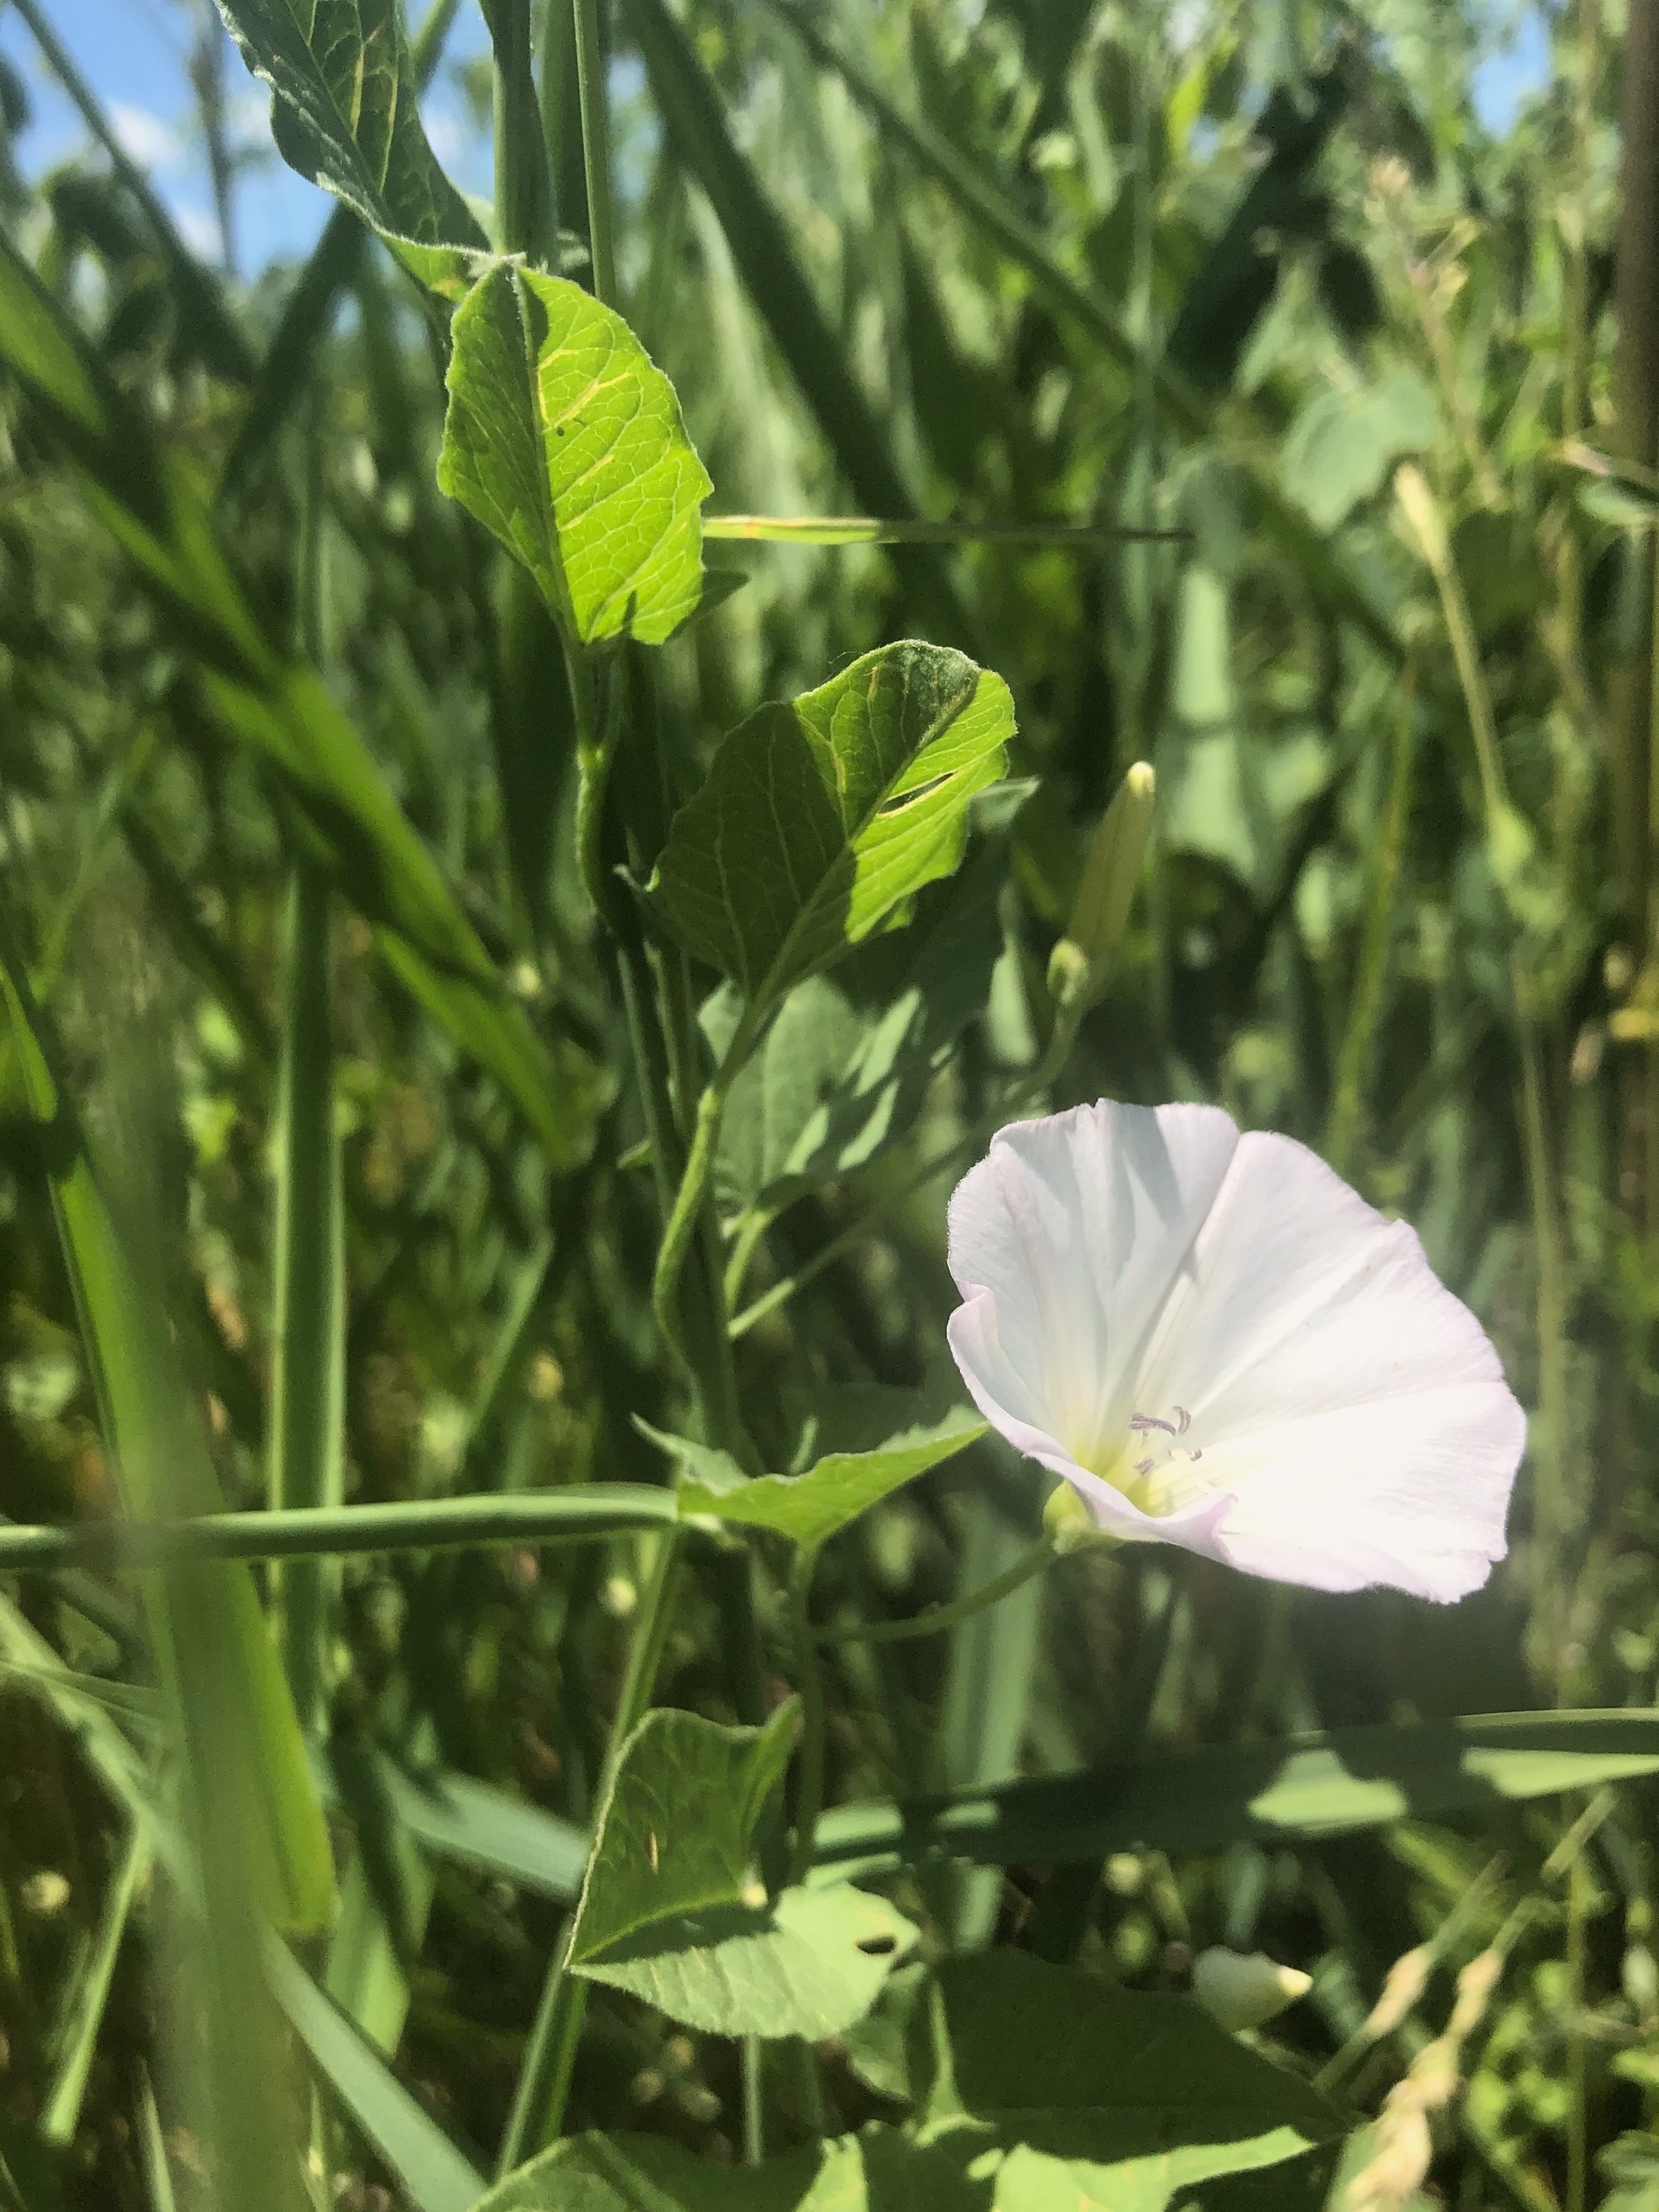 Field Bindweed on shore of Marion Dunn Pond in Madison, Wisconsin on June 14, 2021.